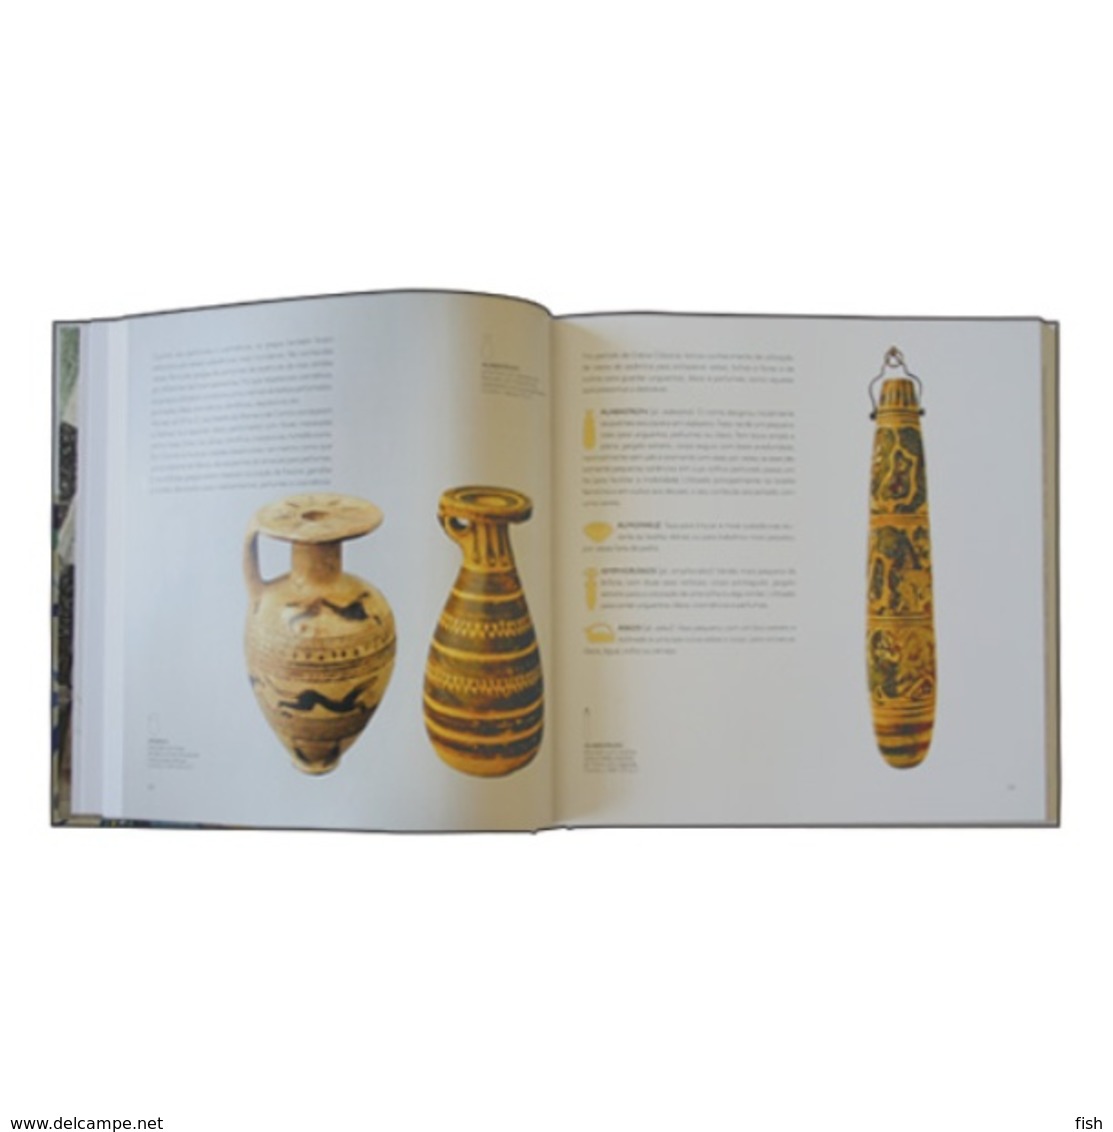 Portugal ** & CTT, Thematic Book With Stamps, Pharmaceutical Ceramics And The Art Of Healing 2009 (20195) - Libro Dell'anno